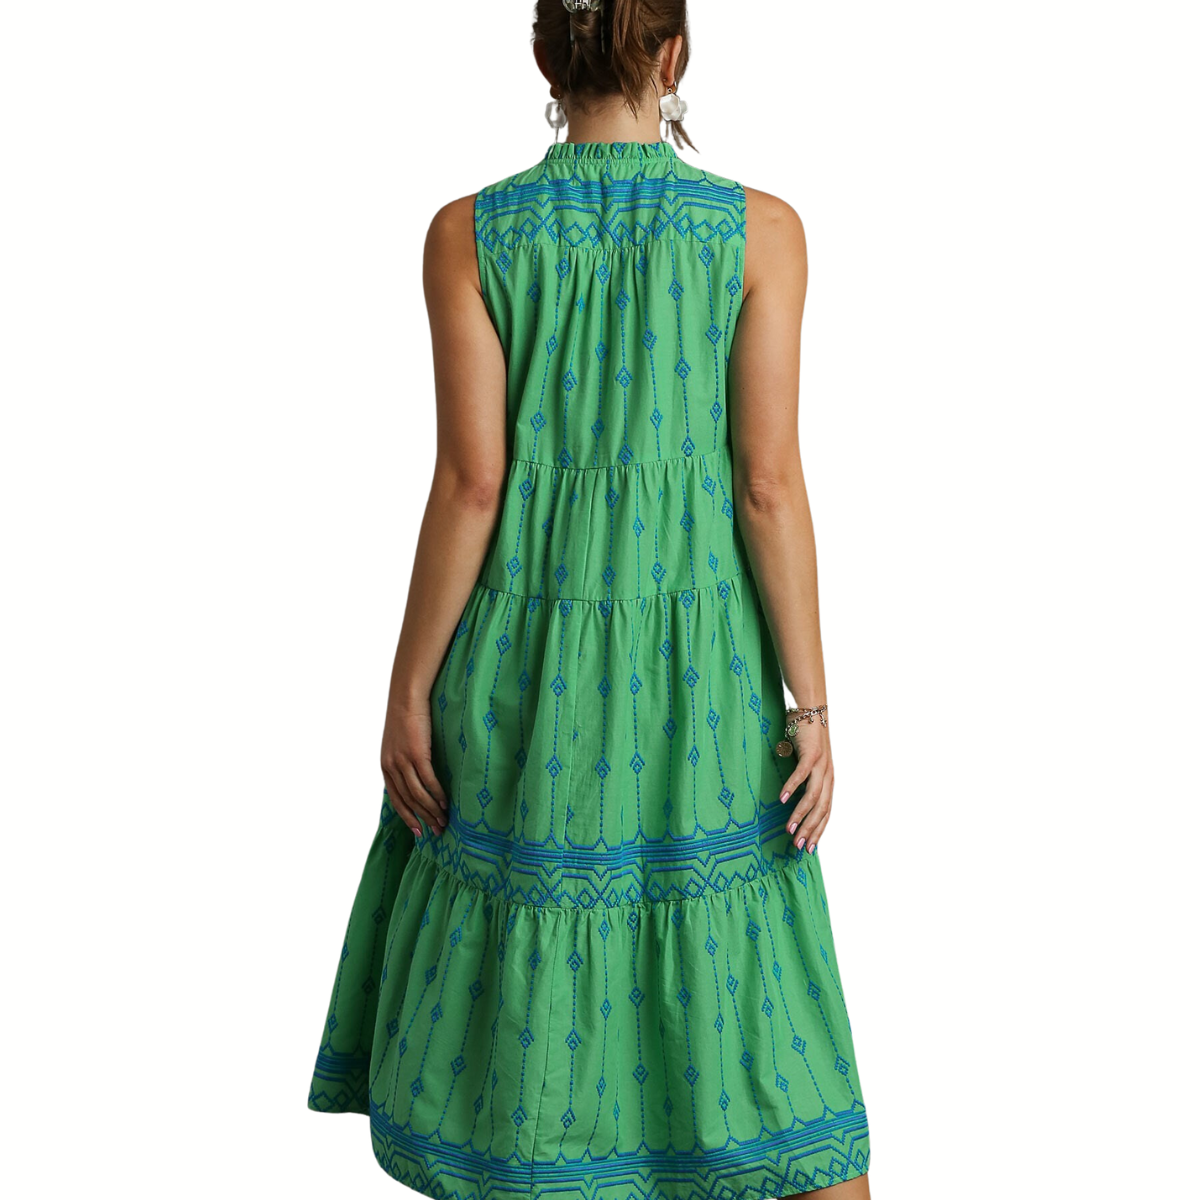 The back view of a woman in an Embroidery A-line Midi Dress in Green by FASHION GO.